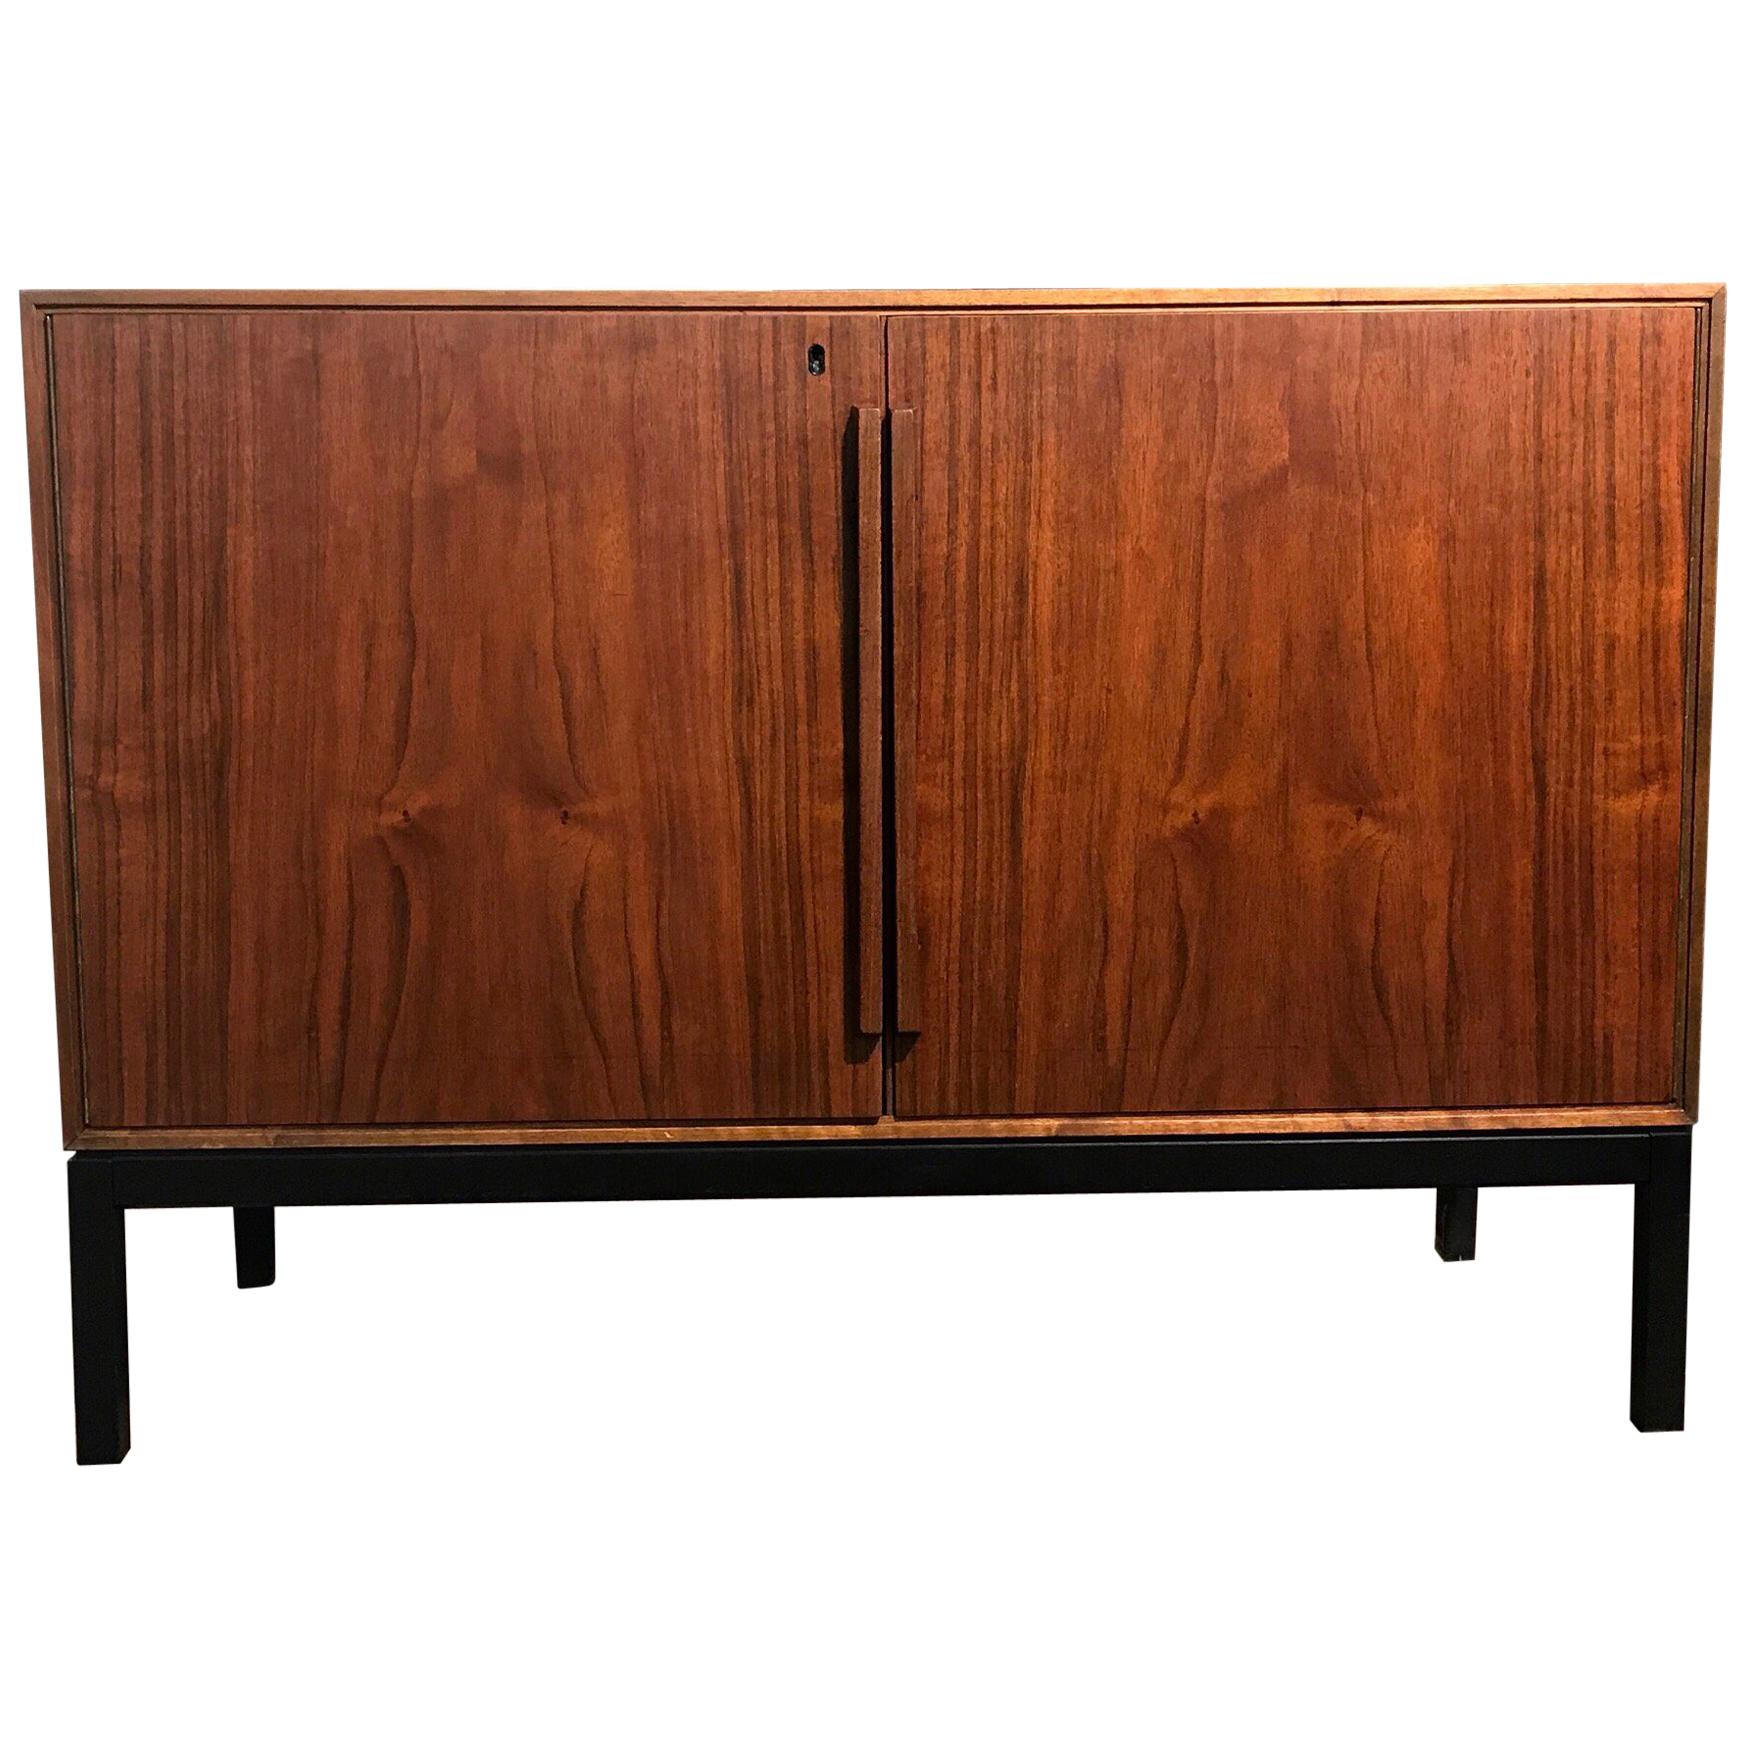 Mid-Century Modern Cabinet with Built-In Refrigerator